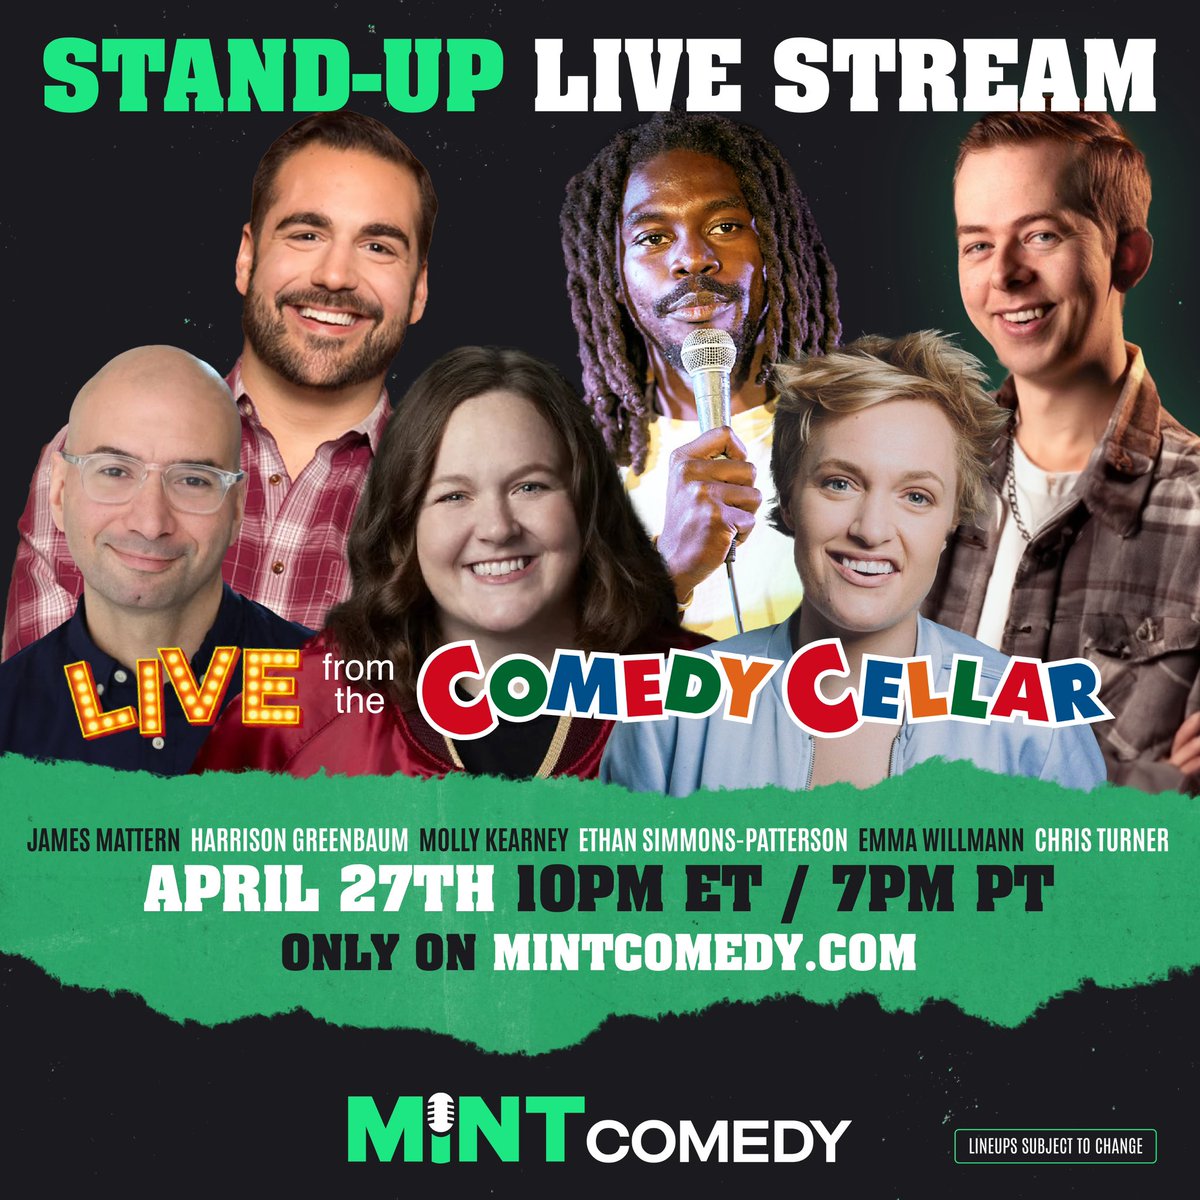 Uncut, uncensored, unbeatable. Watch our livestream of a full 2 hour standup show from the iconic @ComedyCellarUSA this Saturday, only on mintcomedy.com! Featuring: @JamesLmattern @harrisoncomedy @MEATBRICKMOLLY #ethansimmonspatterson @IamEmmaWillmann…